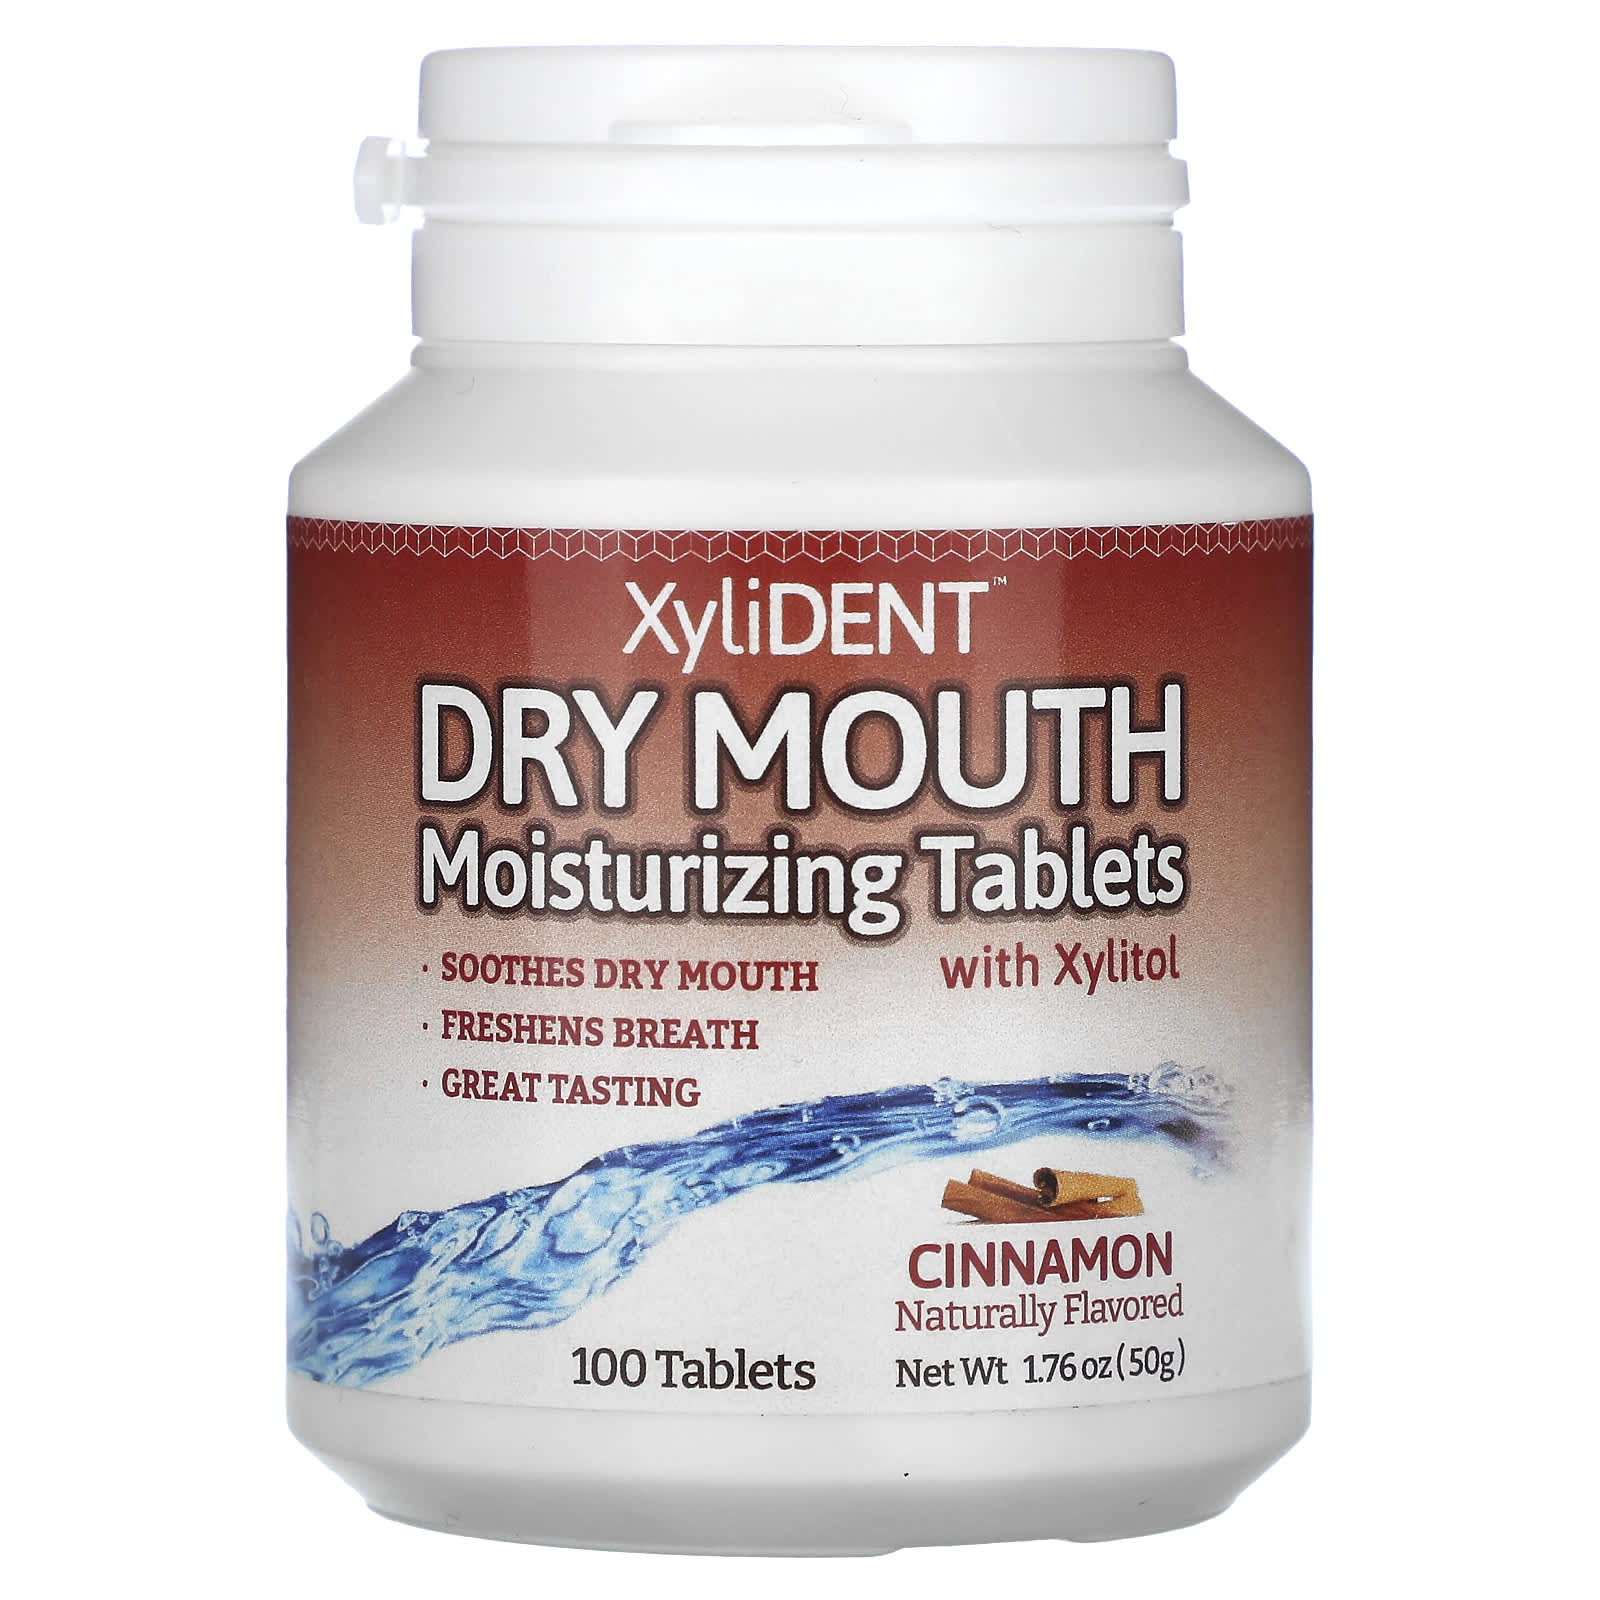 XyliDENT, Dry Mouth Moisturizing Tablets with Xylitol , Cinnamon, 100 ...